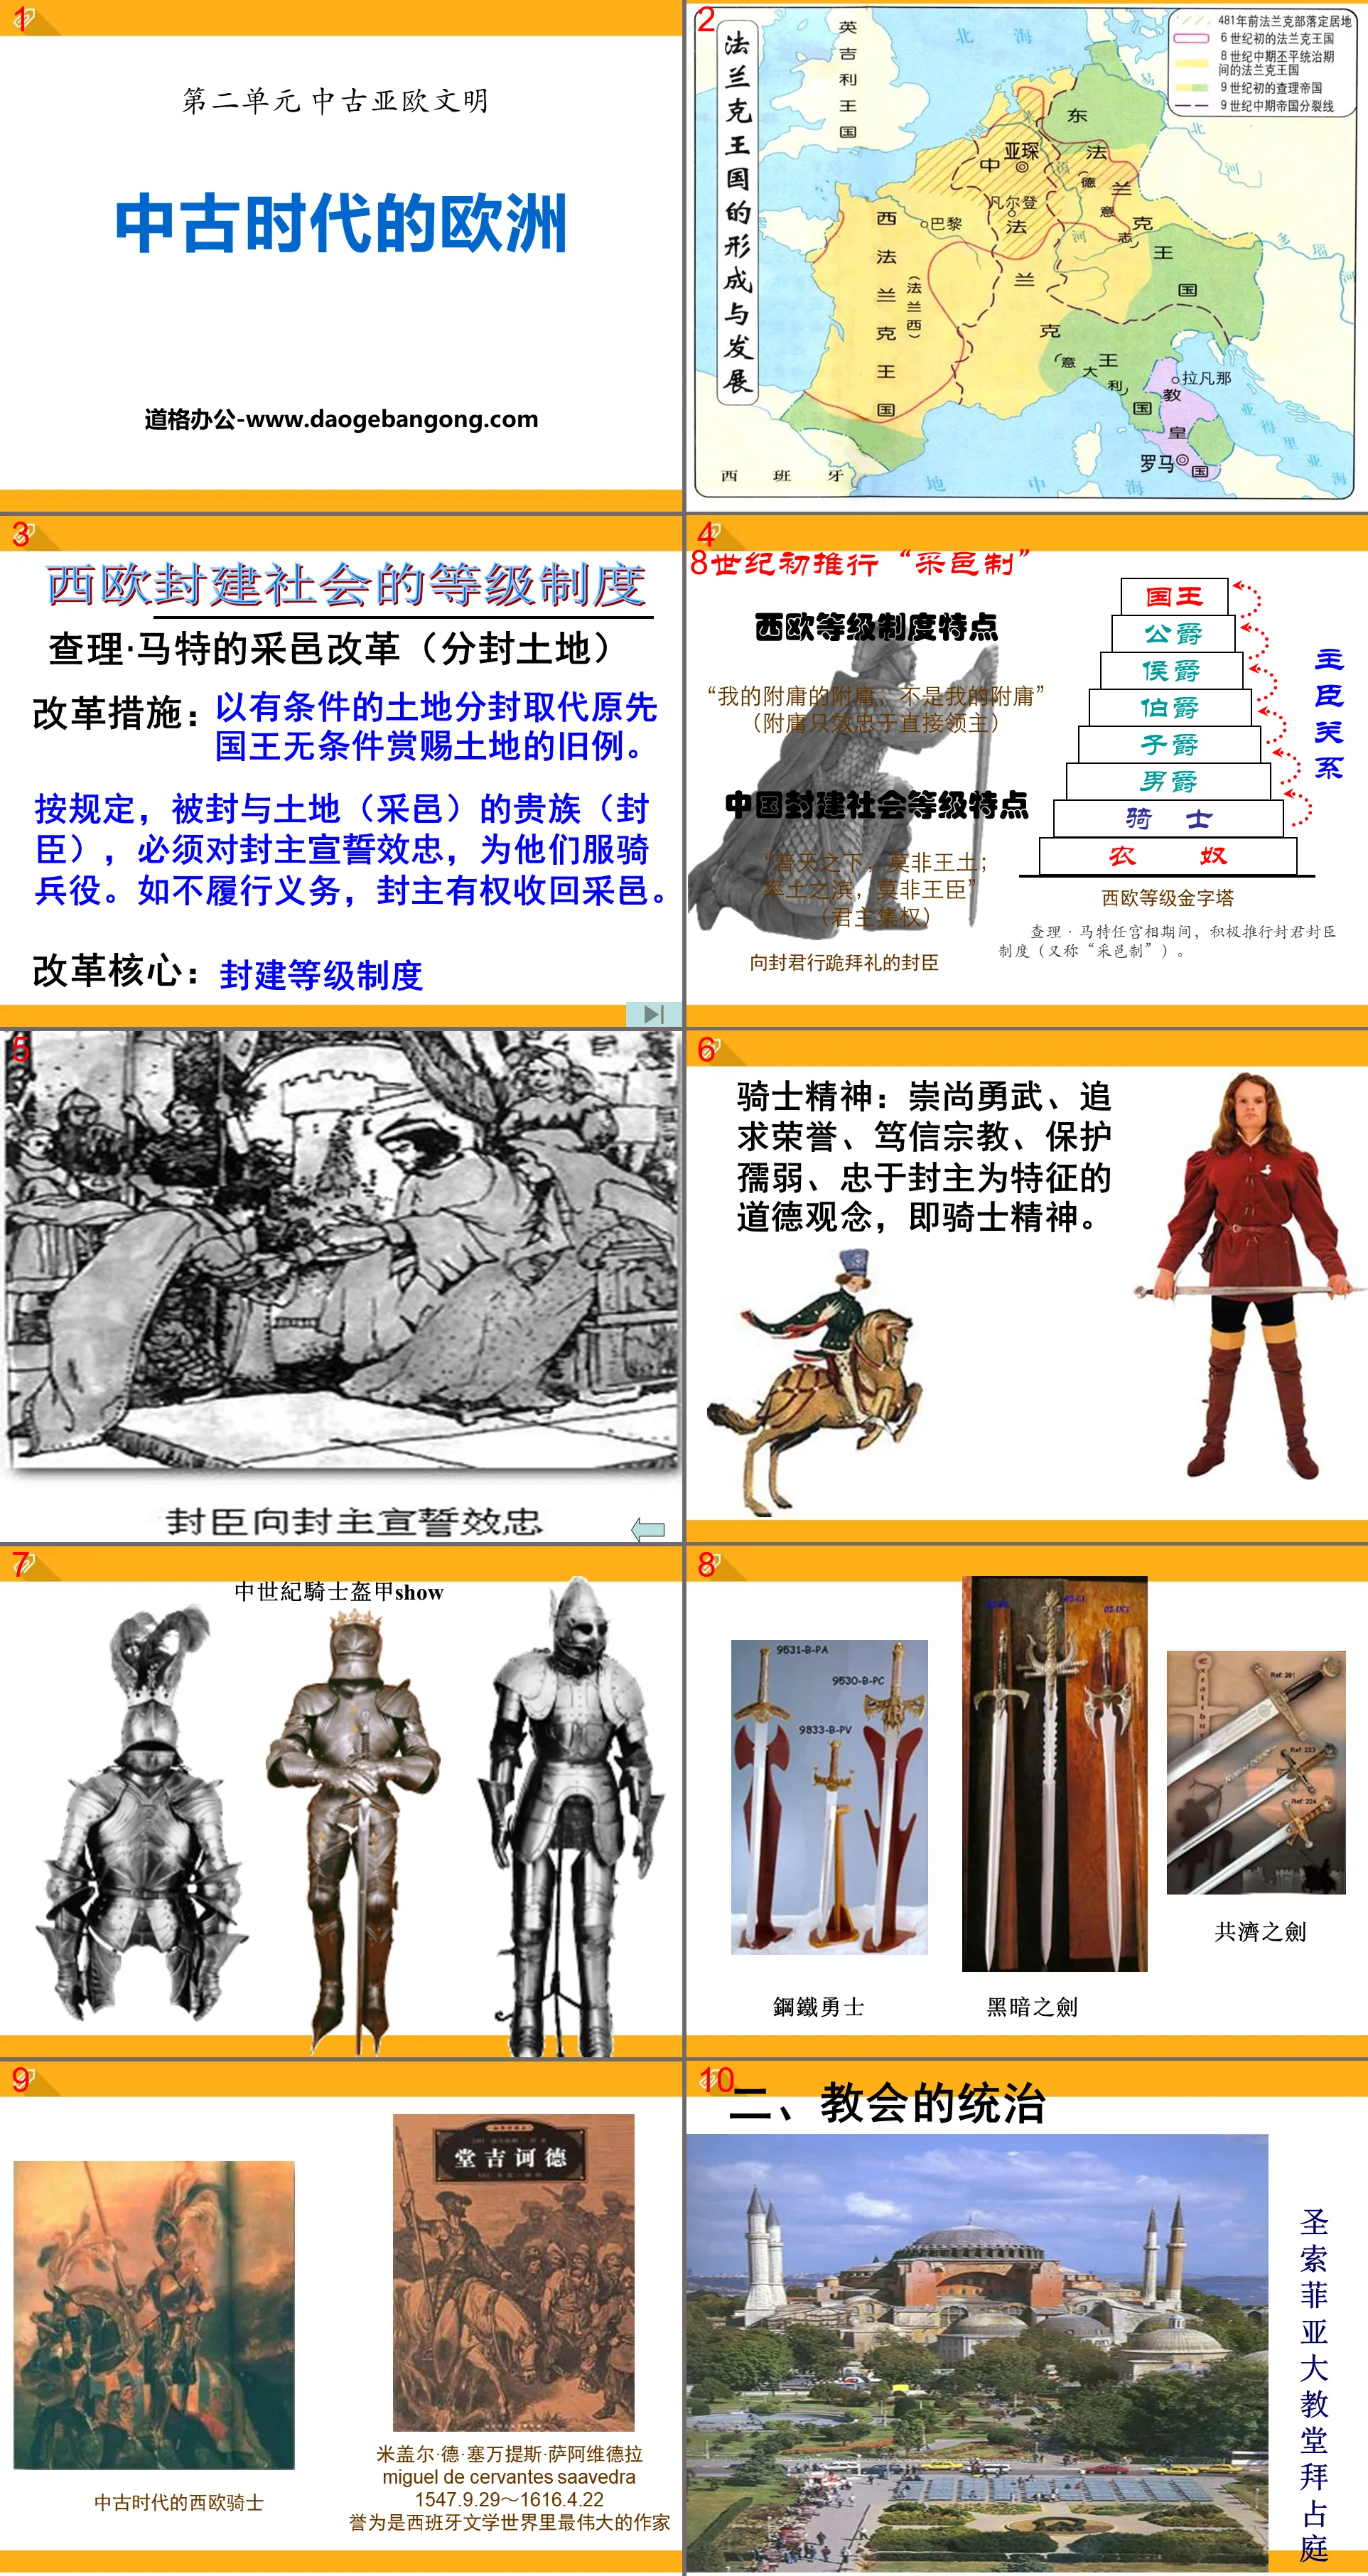 "Europe in the Medieval Times" Medieval Asian and European Civilizations PPT Courseware